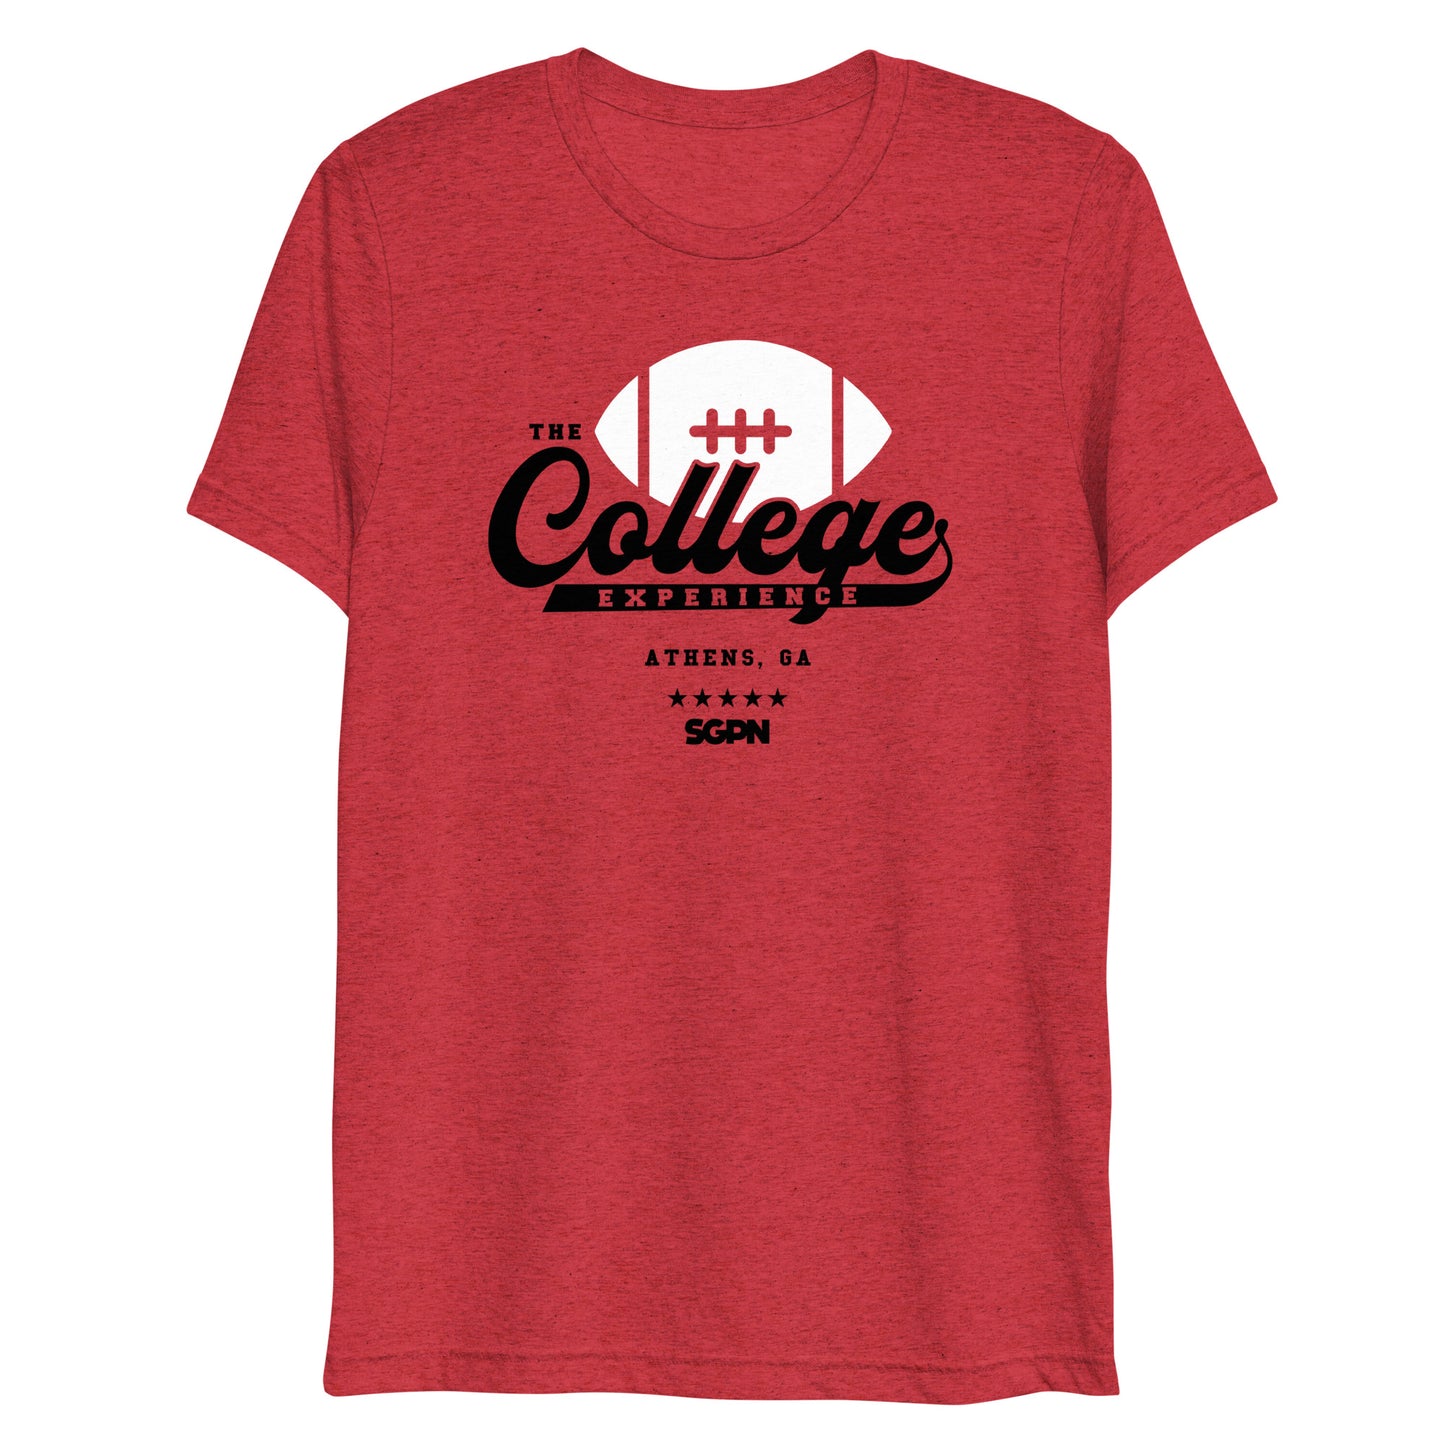 The College Football Experience - Athens edition - Red Short sleeve t-shirt